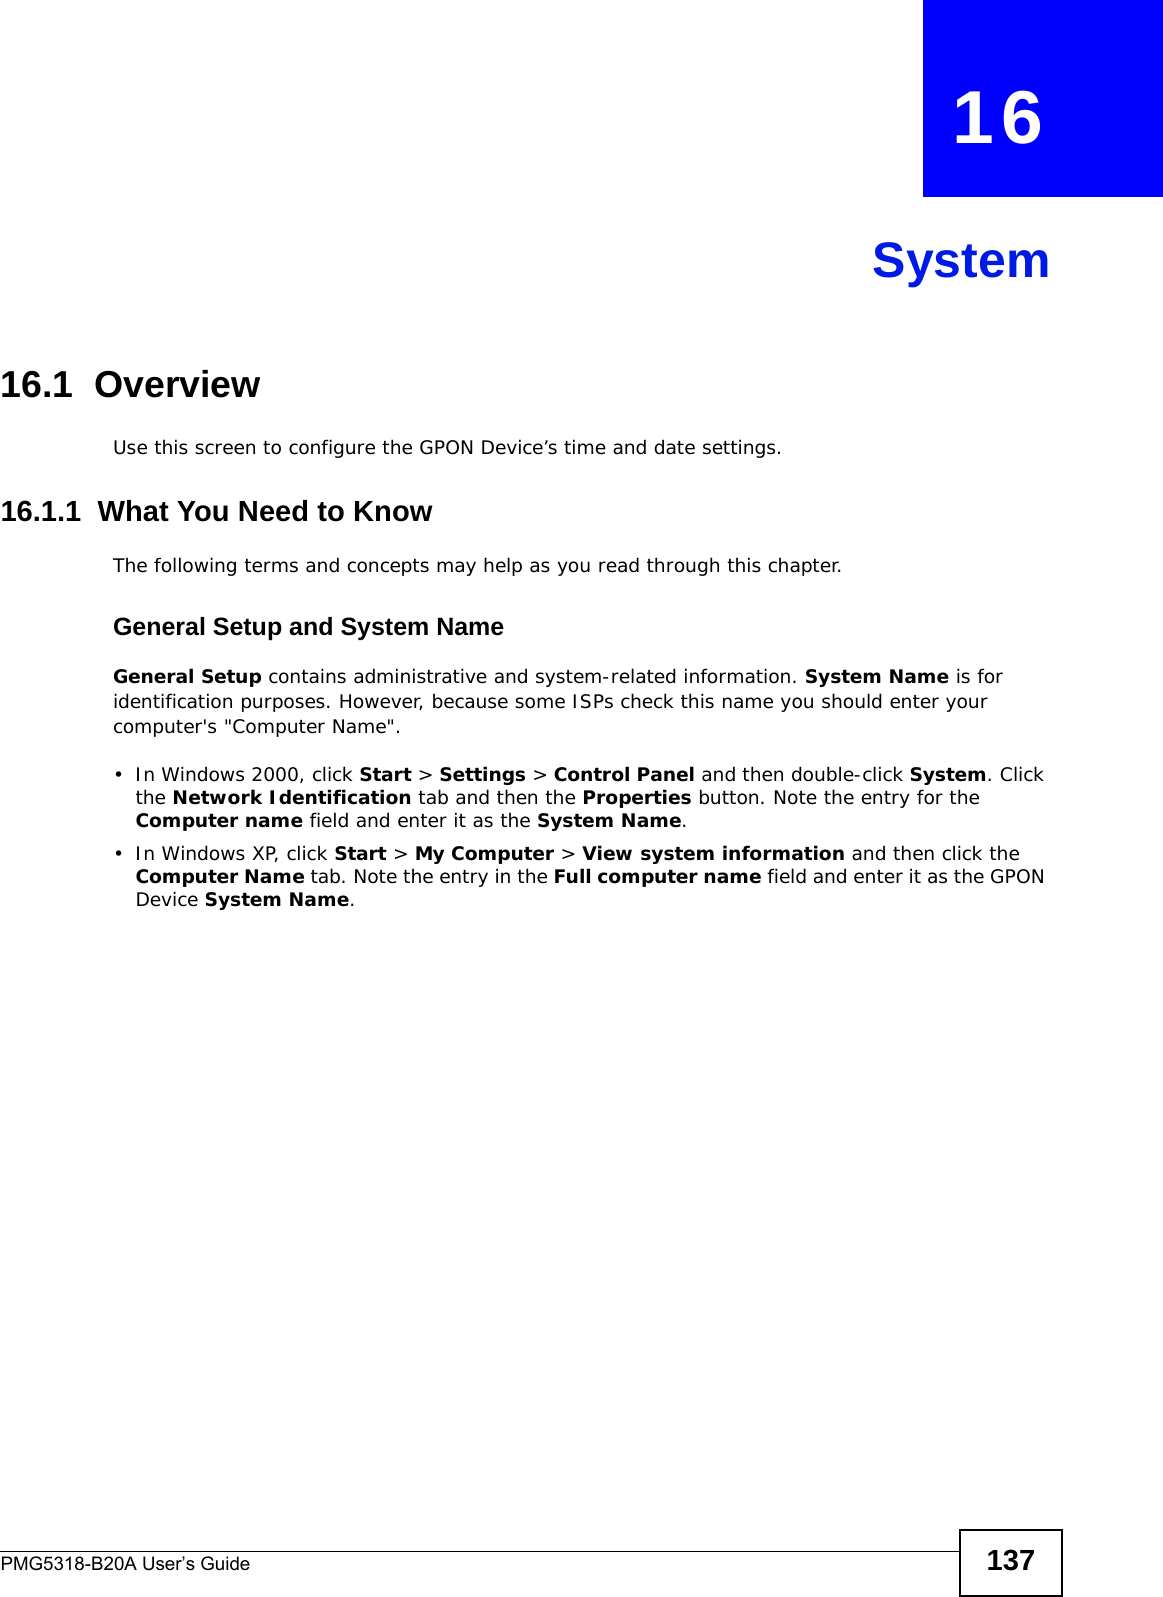 PMG5318-B20A User’s Guide 137CHAPTER   16System16.1  OverviewUse this screen to configure the GPON Device’s time and date settings.16.1.1  What You Need to KnowThe following terms and concepts may help as you read through this chapter.General Setup and System NameGeneral Setup contains administrative and system-related information. System Name is for identification purposes. However, because some ISPs check this name you should enter your computer&apos;s &quot;Computer Name&quot;. • In Windows 2000, click Start &gt; Settings &gt; Control Panel and then double-click System. Click the Network Identification tab and then the Properties button. Note the entry for the Computer name field and enter it as the System Name.• In Windows XP, click Start &gt; My Computer &gt; View system information and then click the Computer Name tab. Note the entry in the Full computer name field and enter it as the GPON Device System Name.